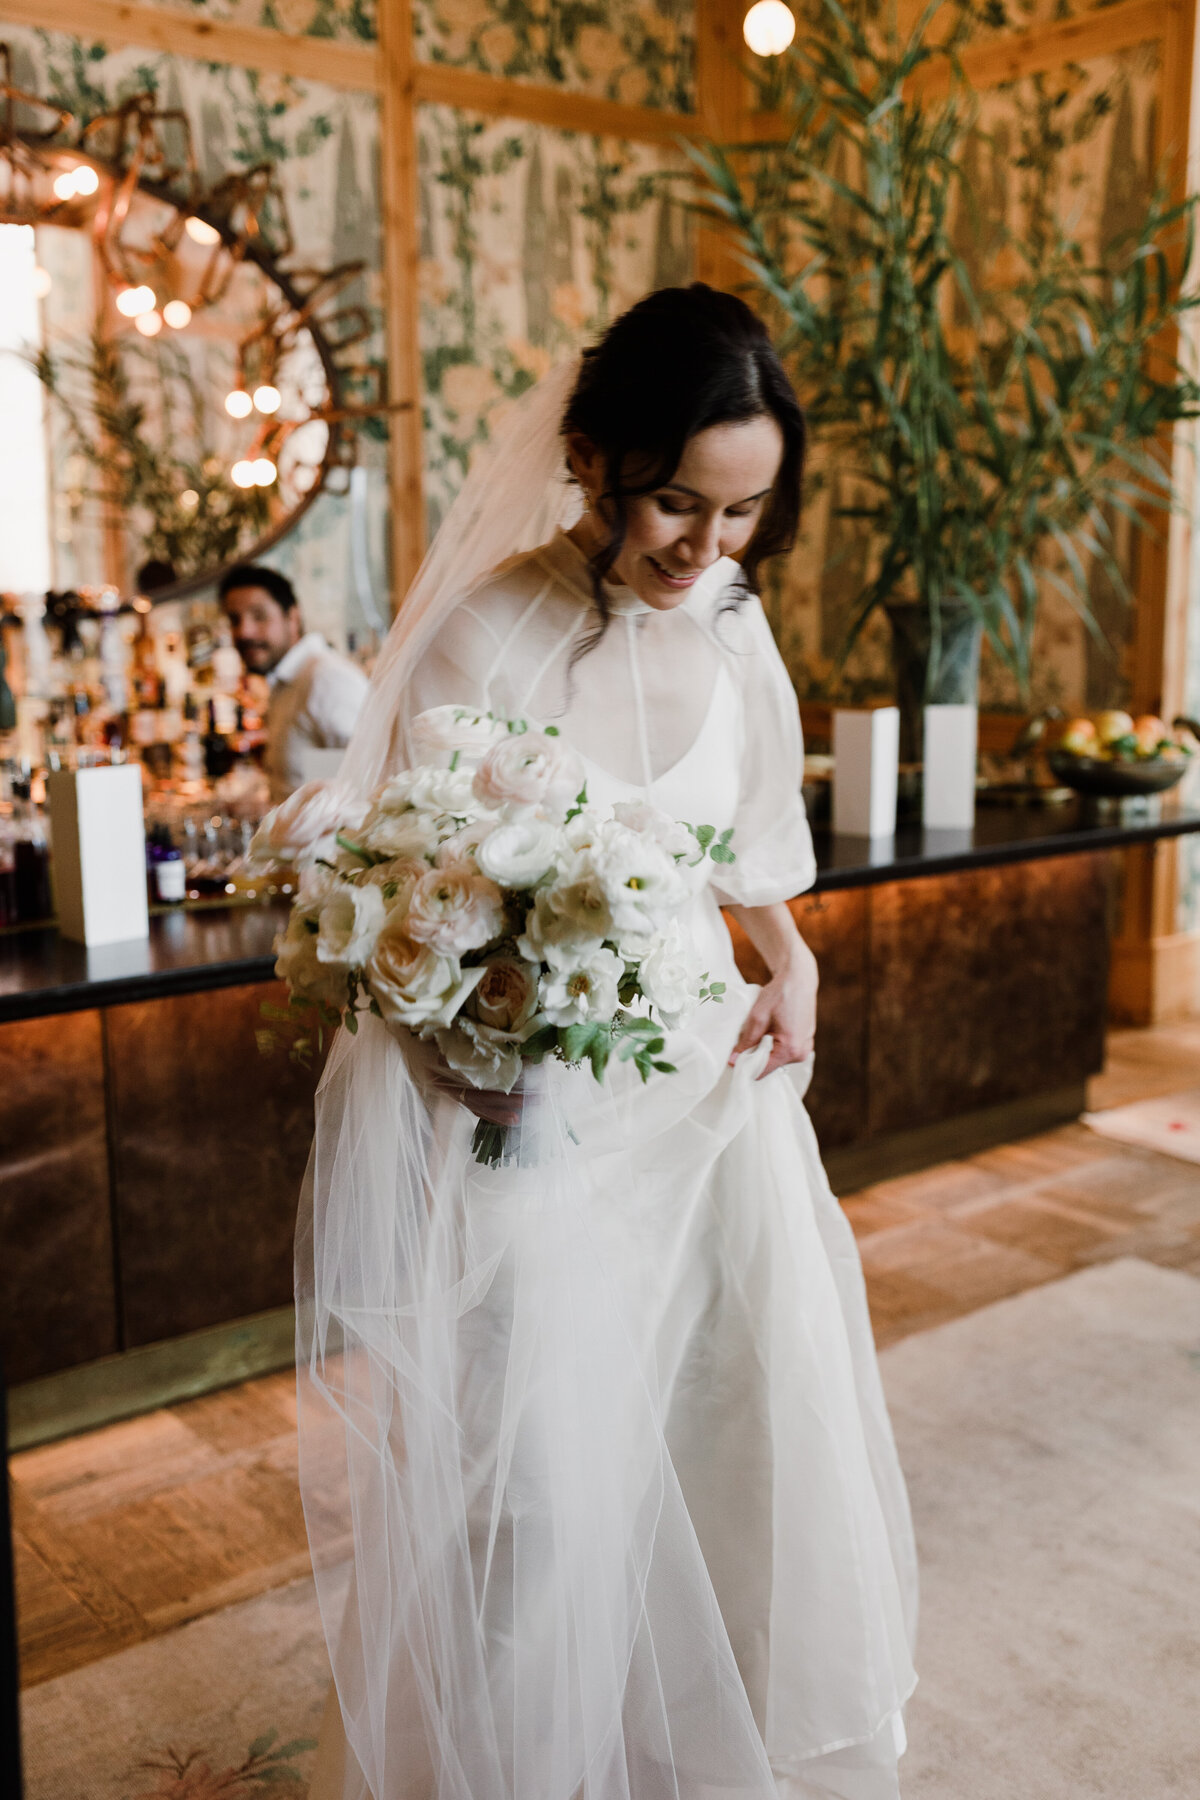 Bride carrying bouquet of white florals for intimate wedding in Austin